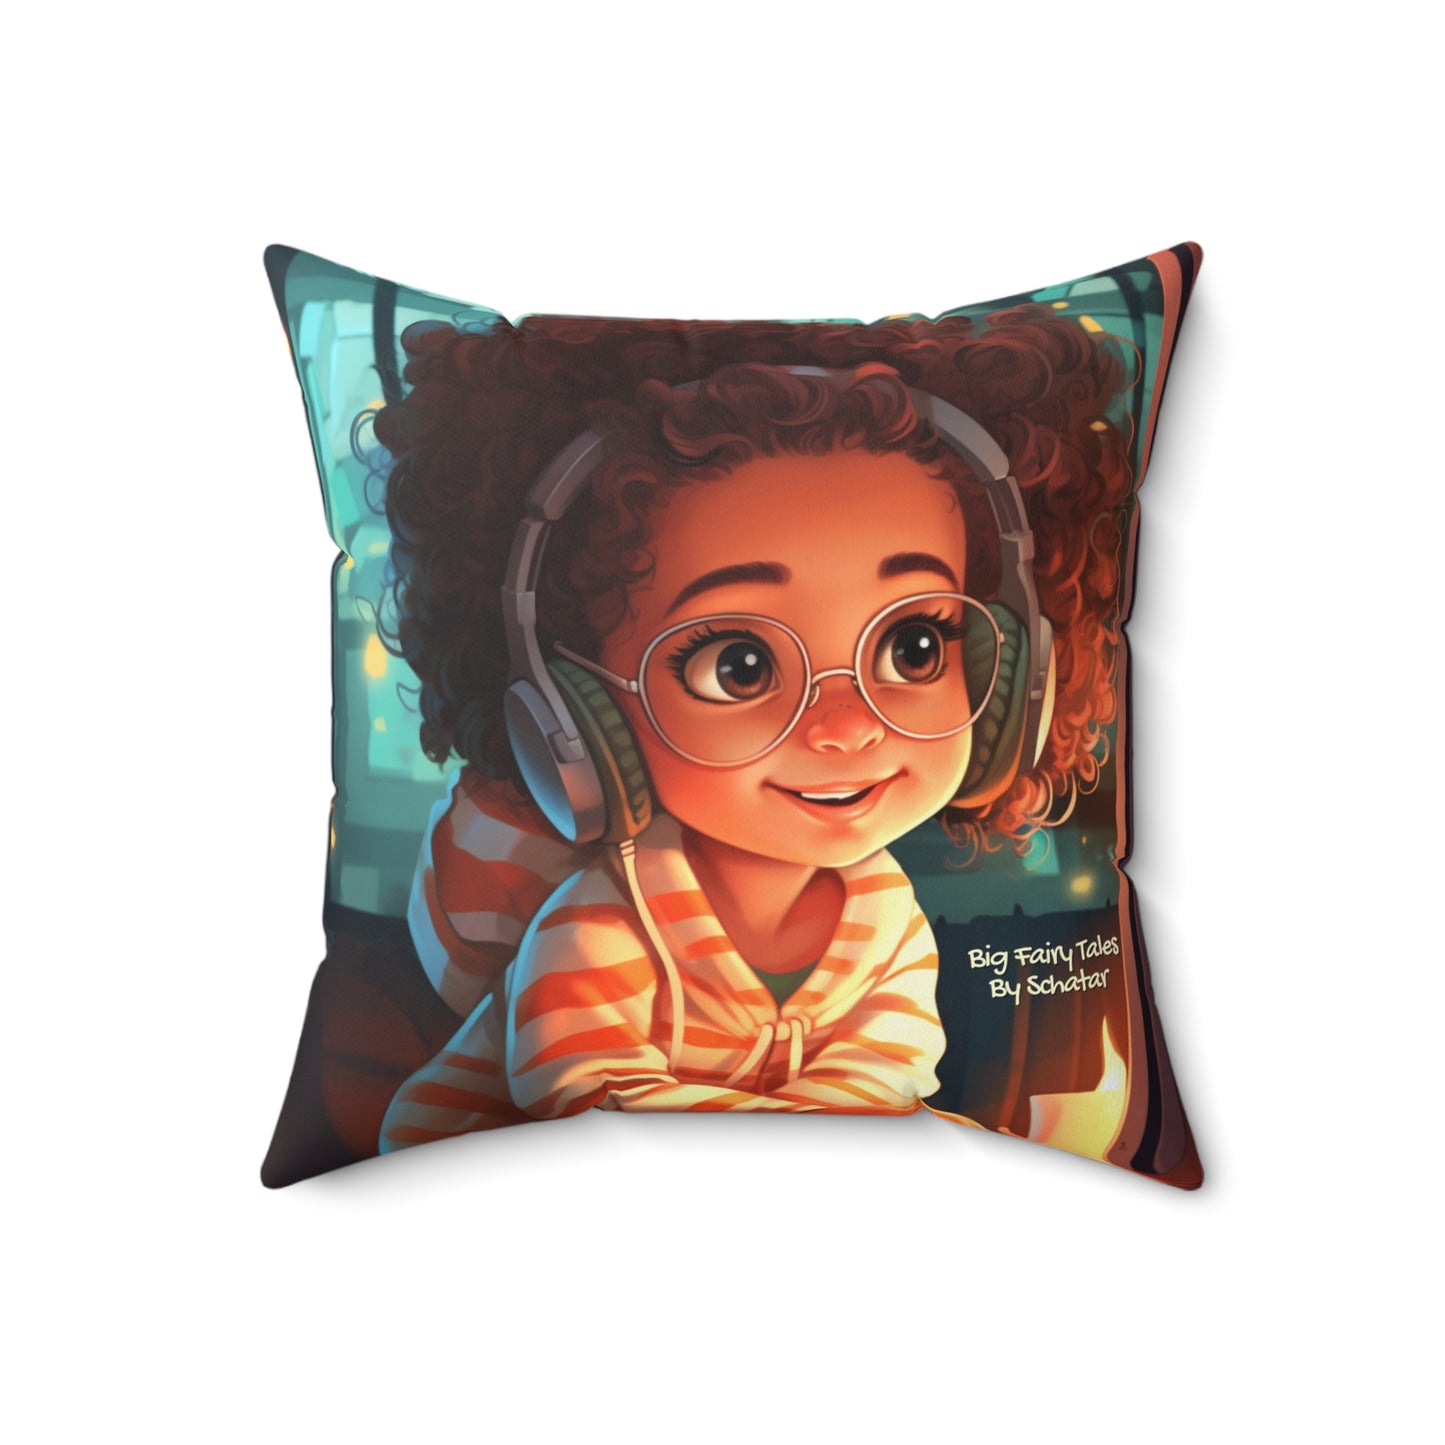 Multimedia Producer - Big Little Professionals Plush Pillow 17 From Big Fairy Tales By Schatar